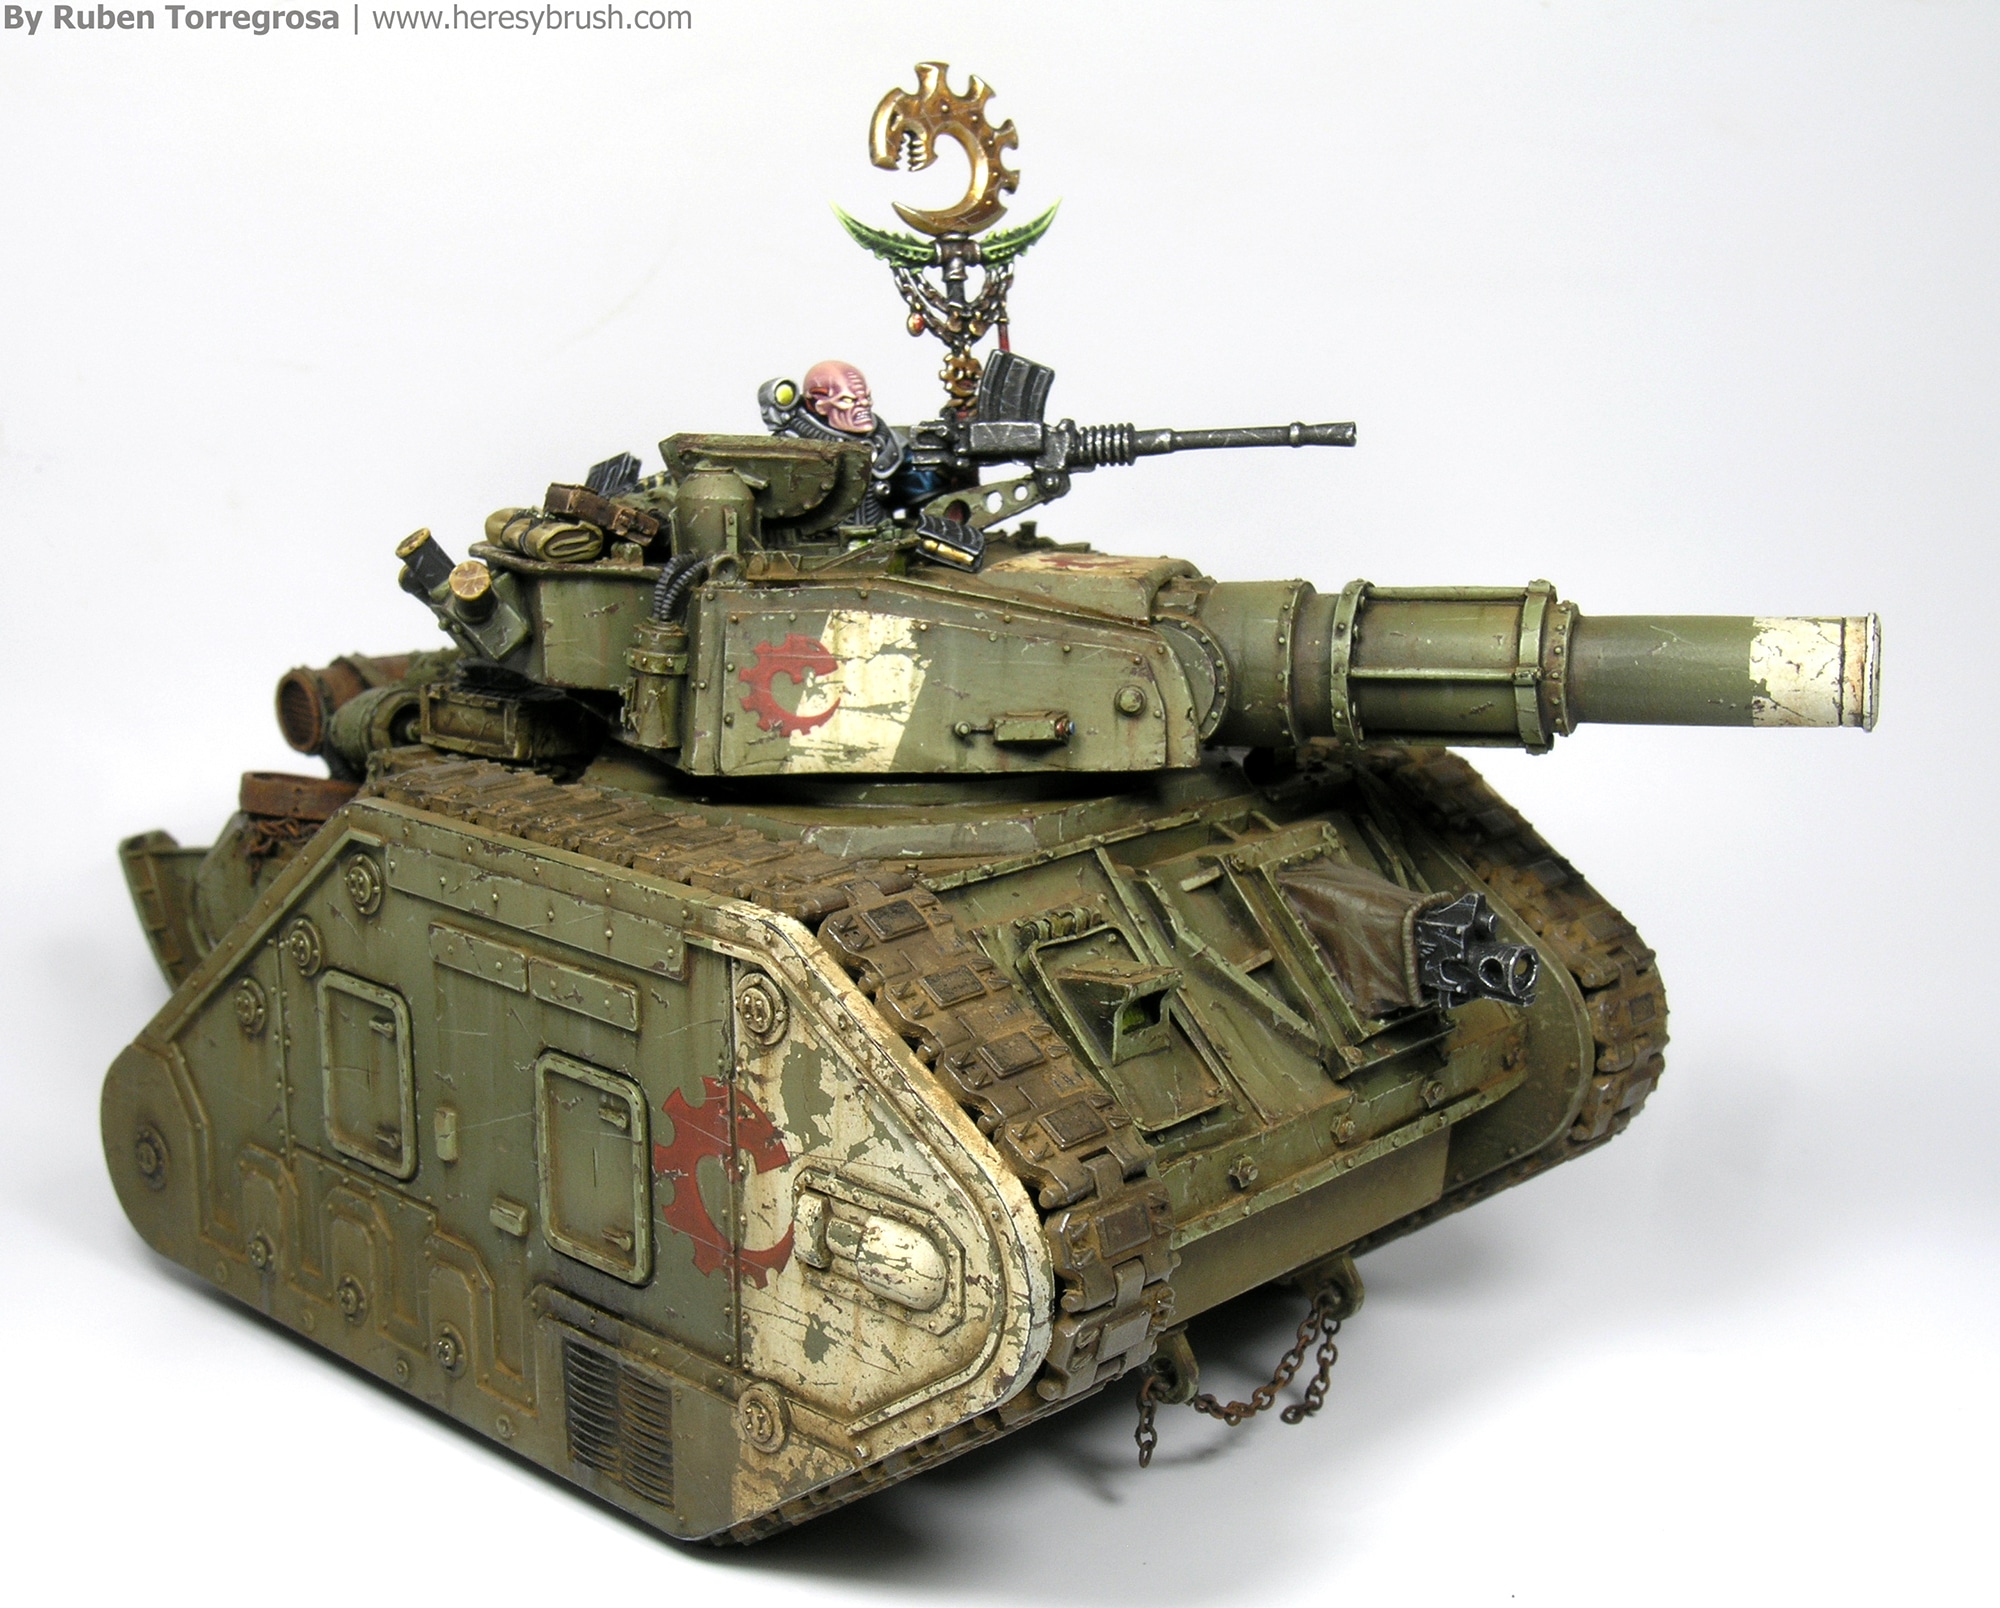 How to paint Warhammer 40.000 tanks with airbrush and weathering techniques